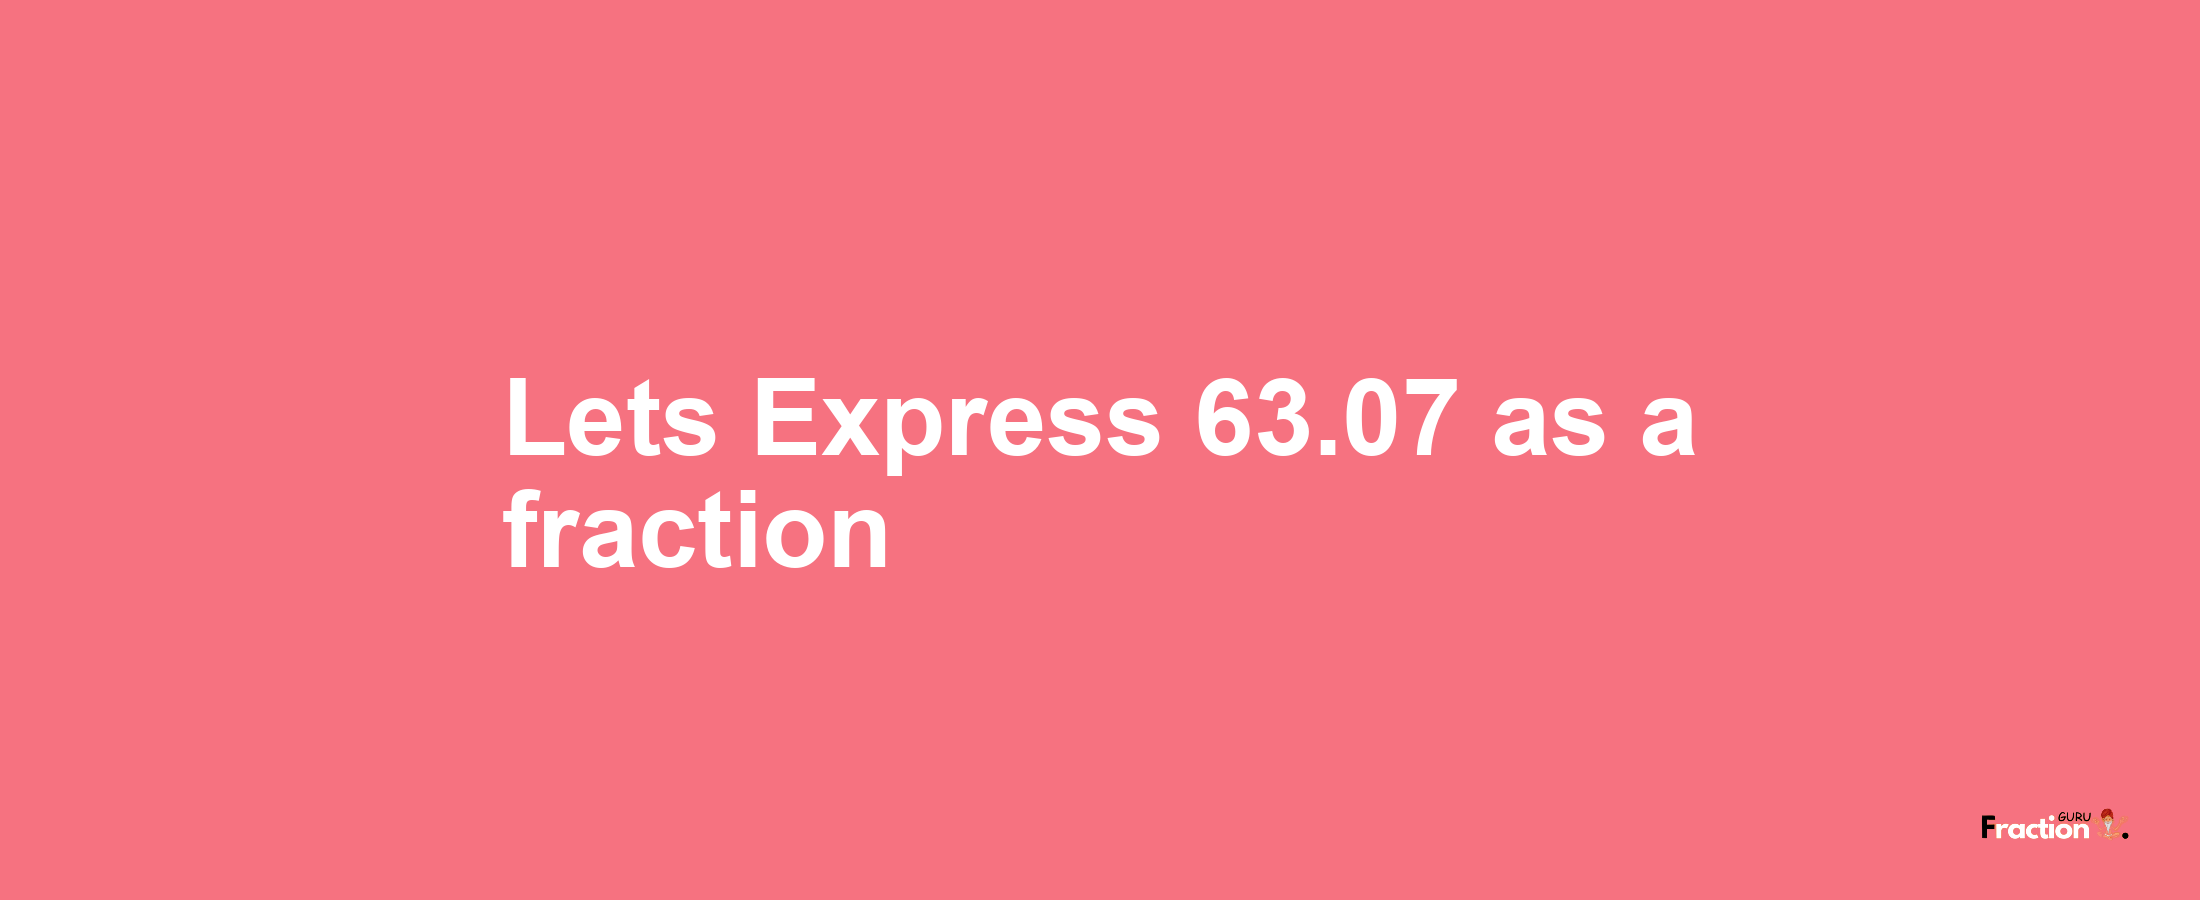 Lets Express 63.07 as afraction